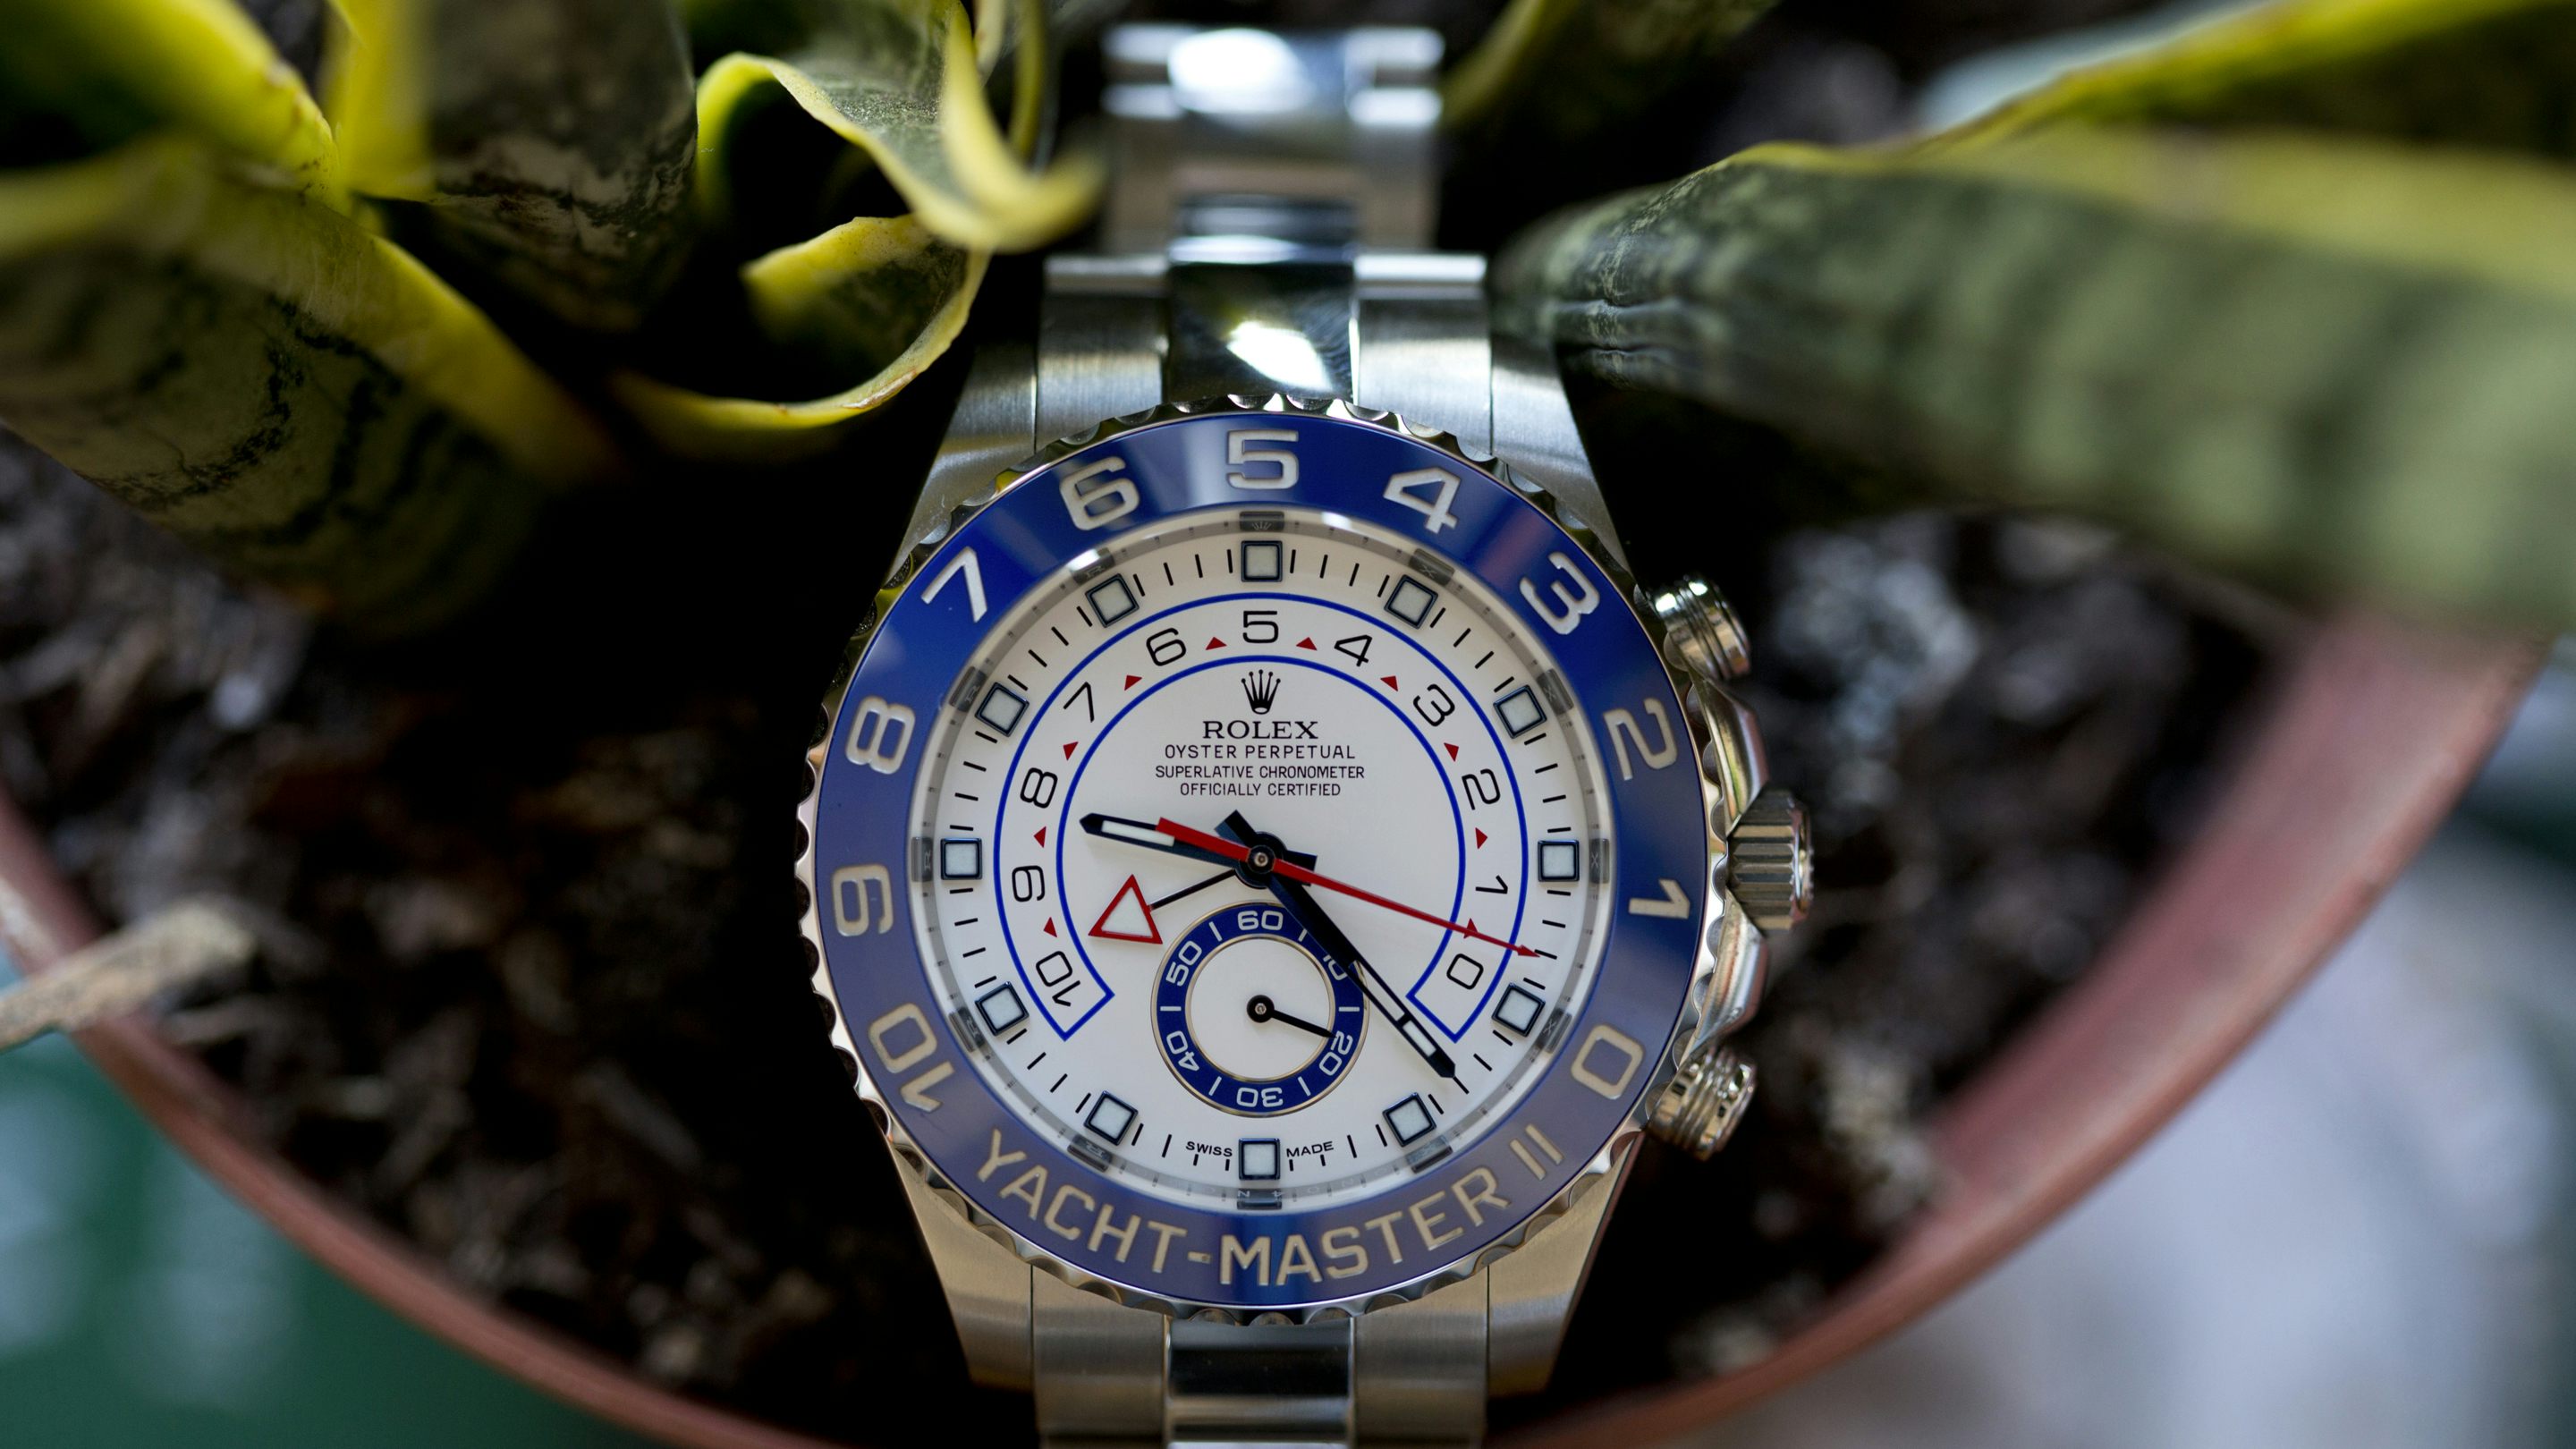 how much does a yacht master weight